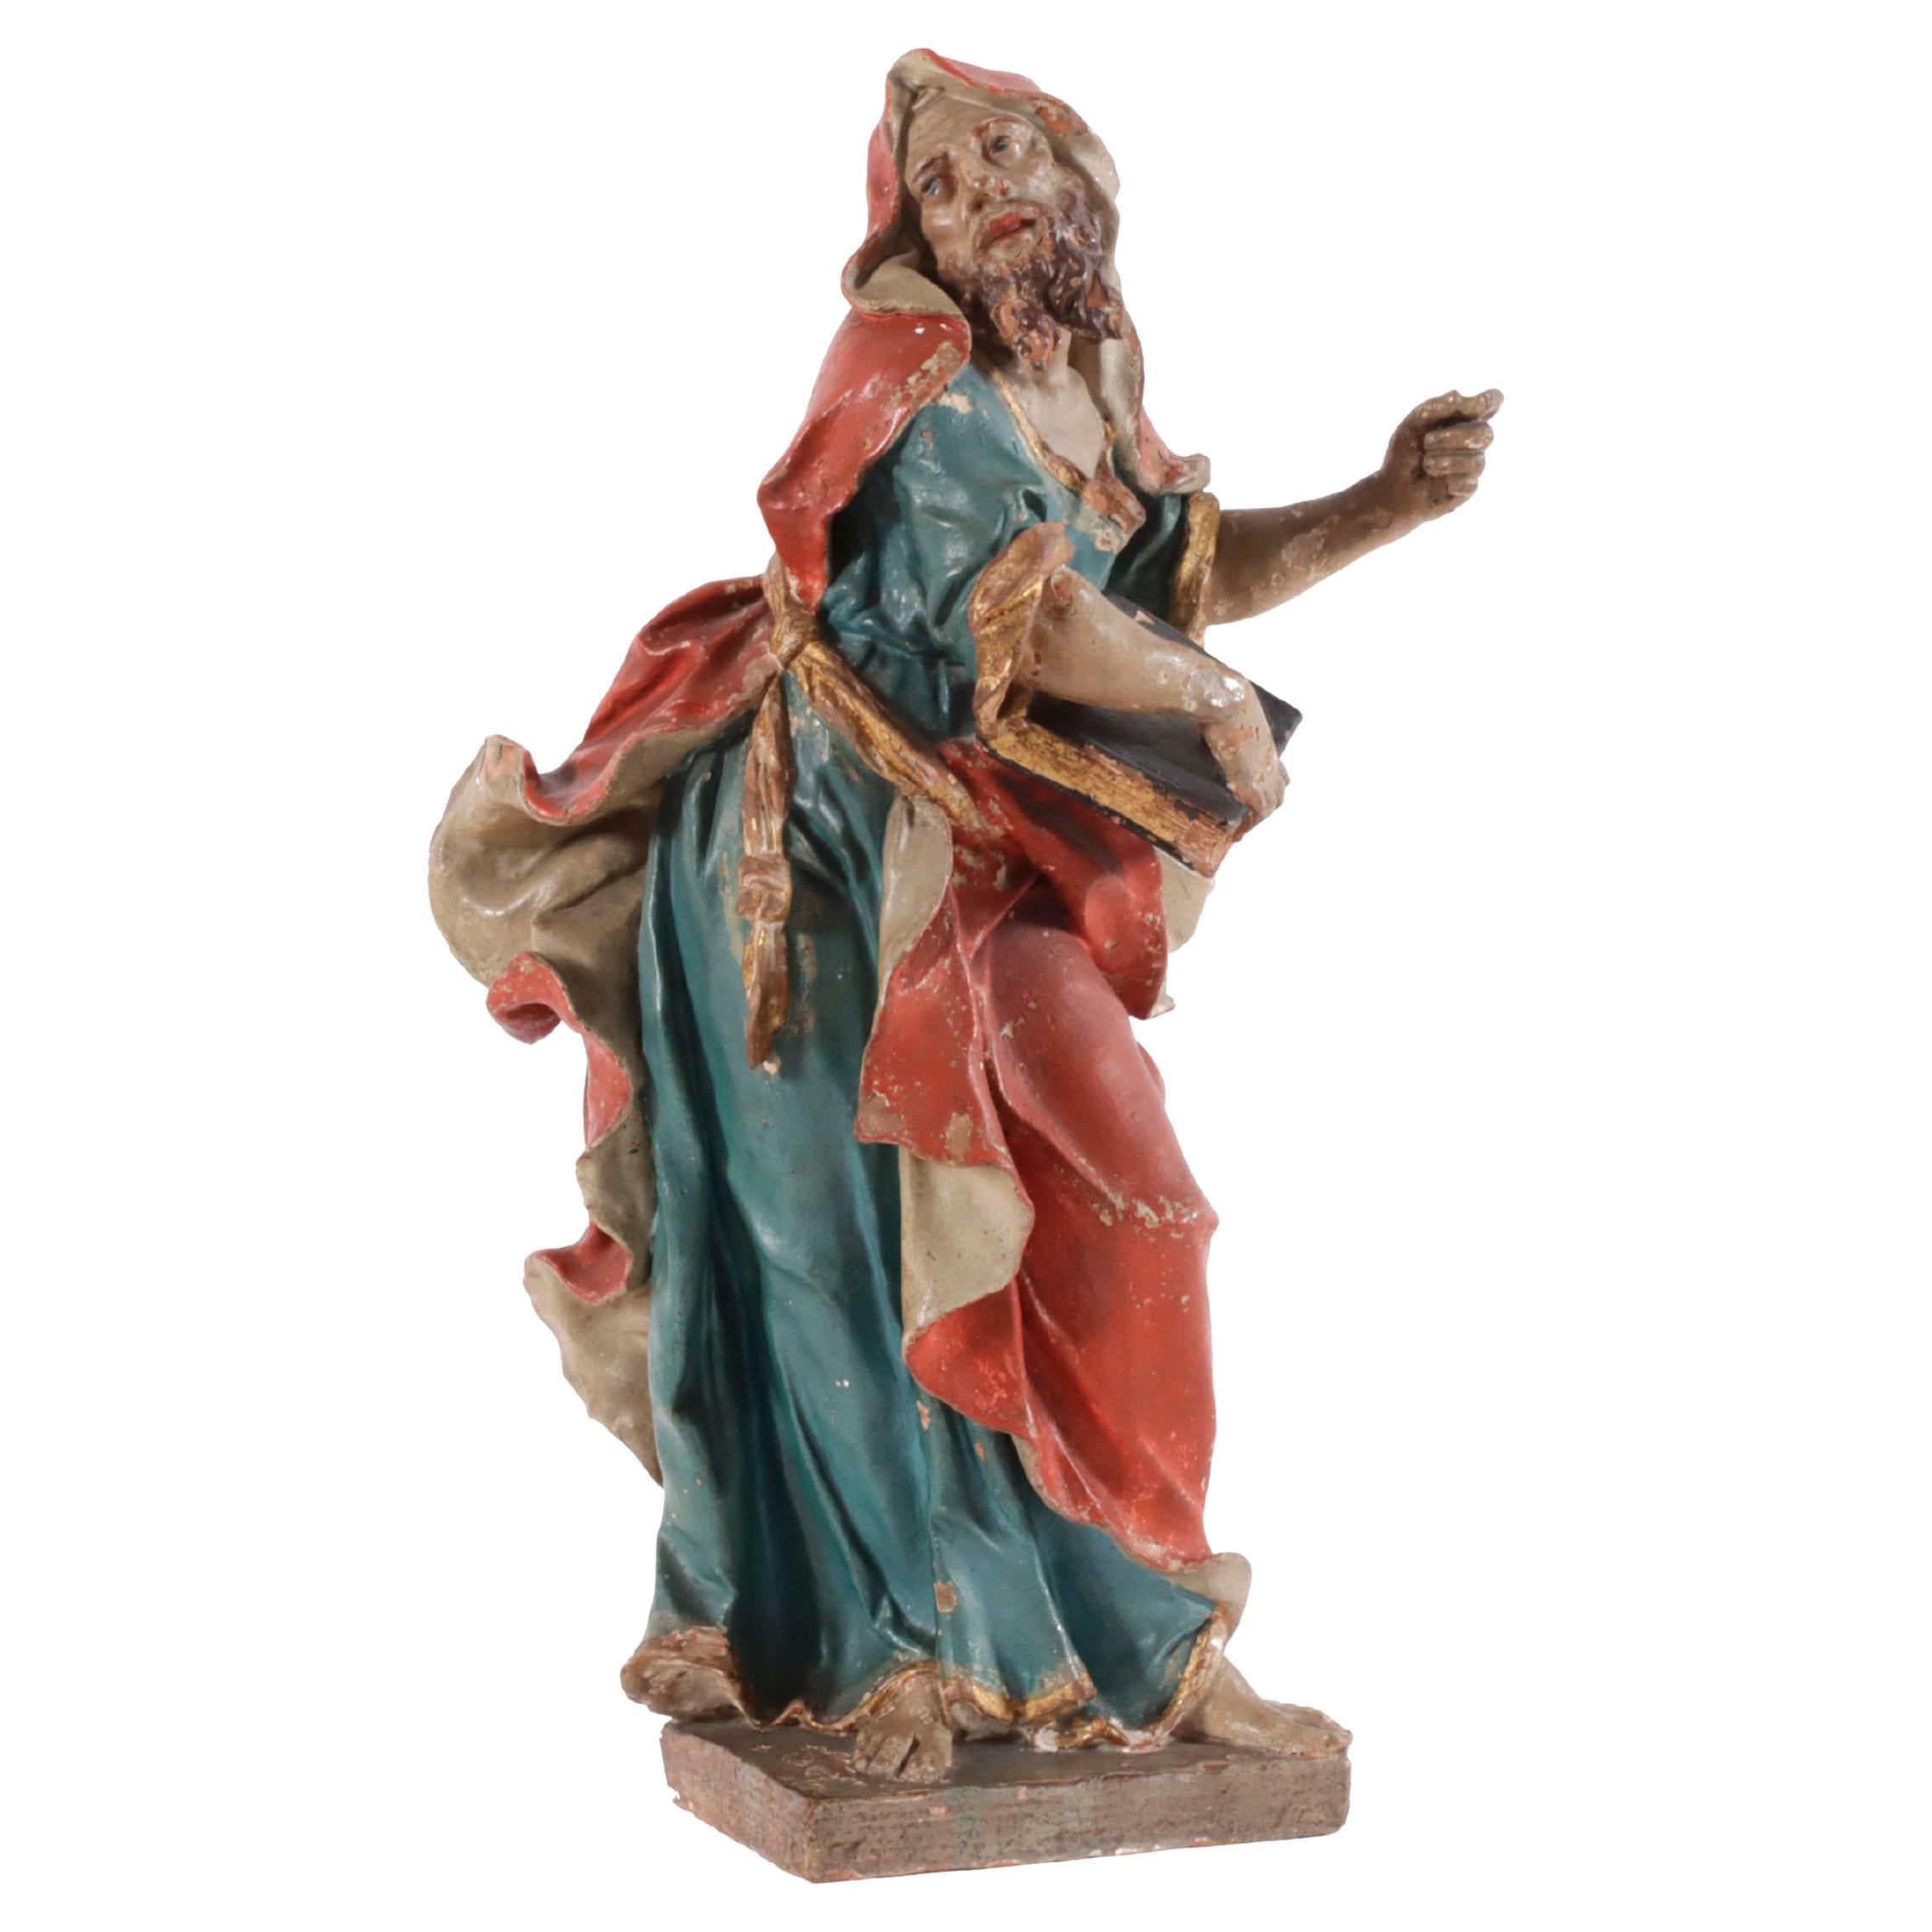 Painted Terracotta Sculpture Portraying the Apostle Saint Paul, 18th Century